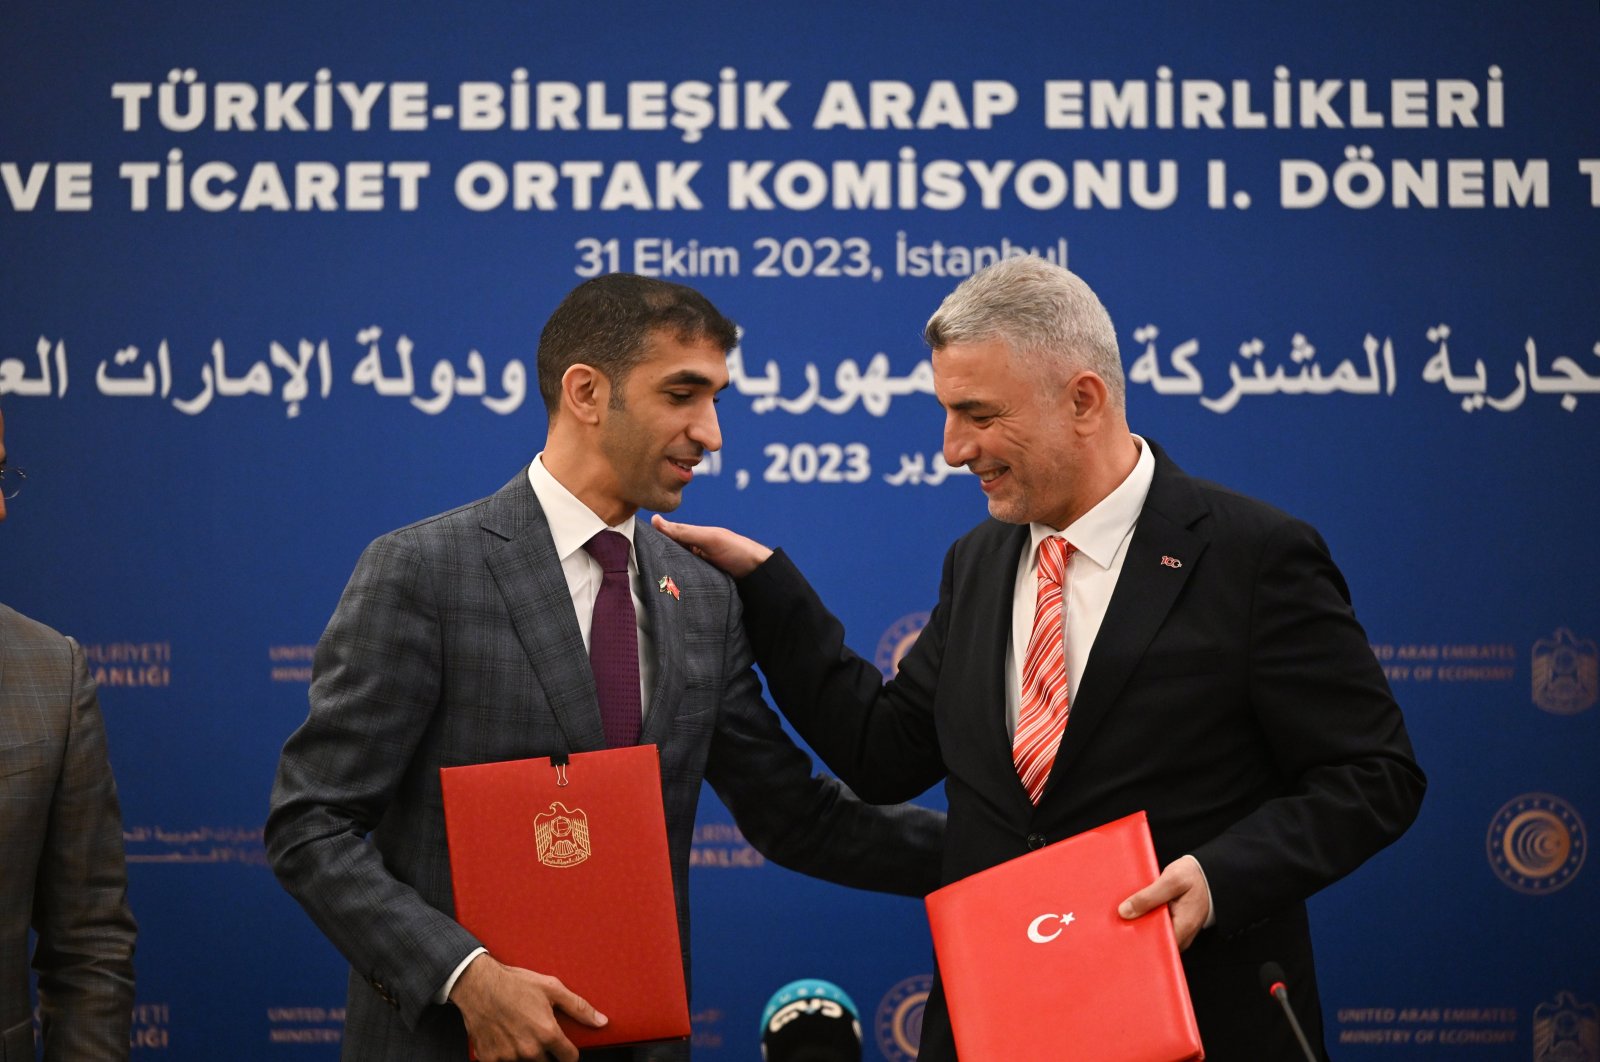 Trade Minister Ömer Bolat (R) and his Emirati counterpart Thani bin Ahmed Al Zeyoudi after singing an agreement during the Türkiye-UAE Joint Economic and Trade Committee (JETCO) 1st Term Meeting, in Istanbul, Türkiye, Oct. 31, 2023. (AA Photo)